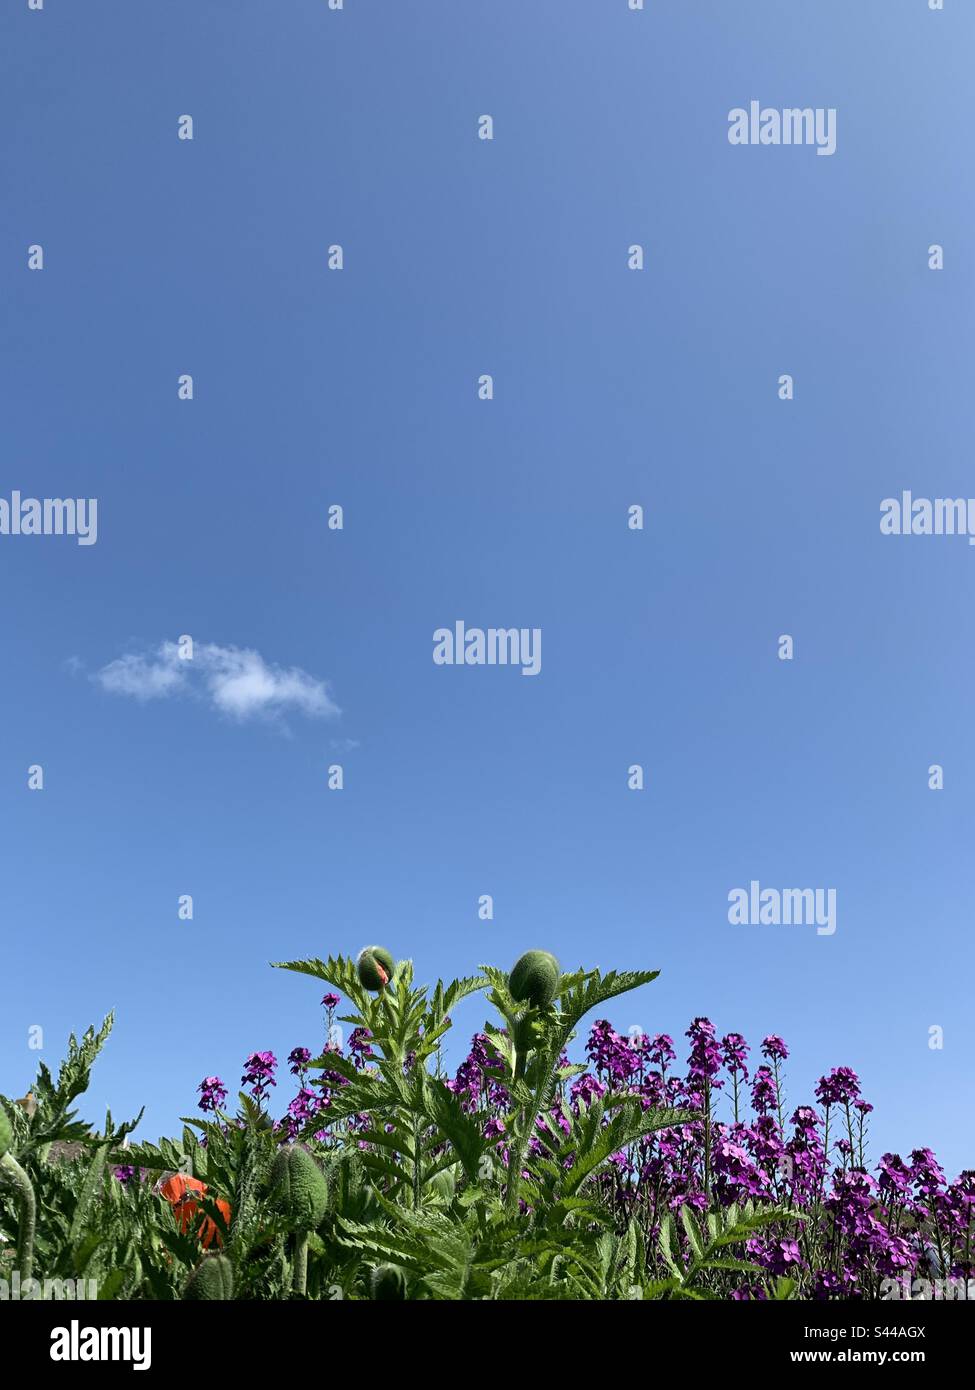 Flower bed with giant poppy buds and Erysimum plant. Blue sky with one small white cloud. Stock Photo